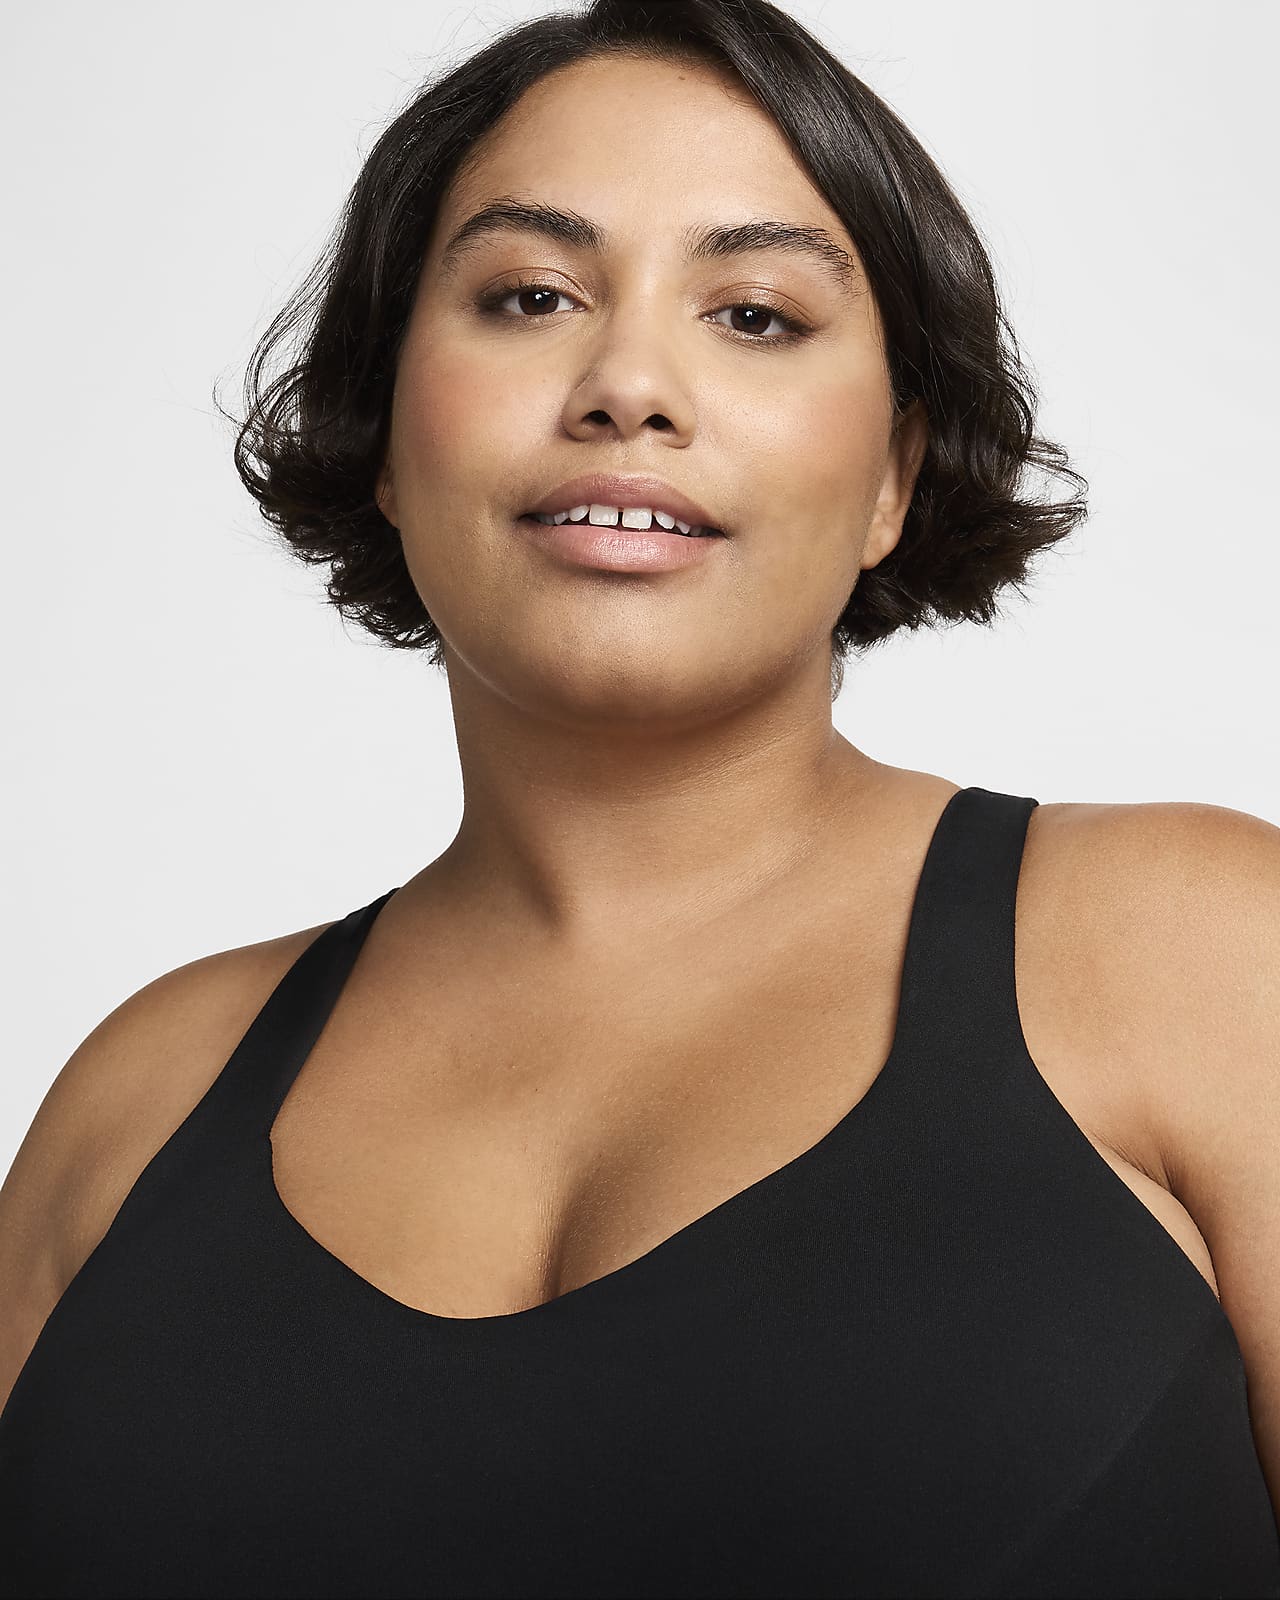 Nike Indy High-Support Women's Padded Adjustable Sports Bra (Plus Size)